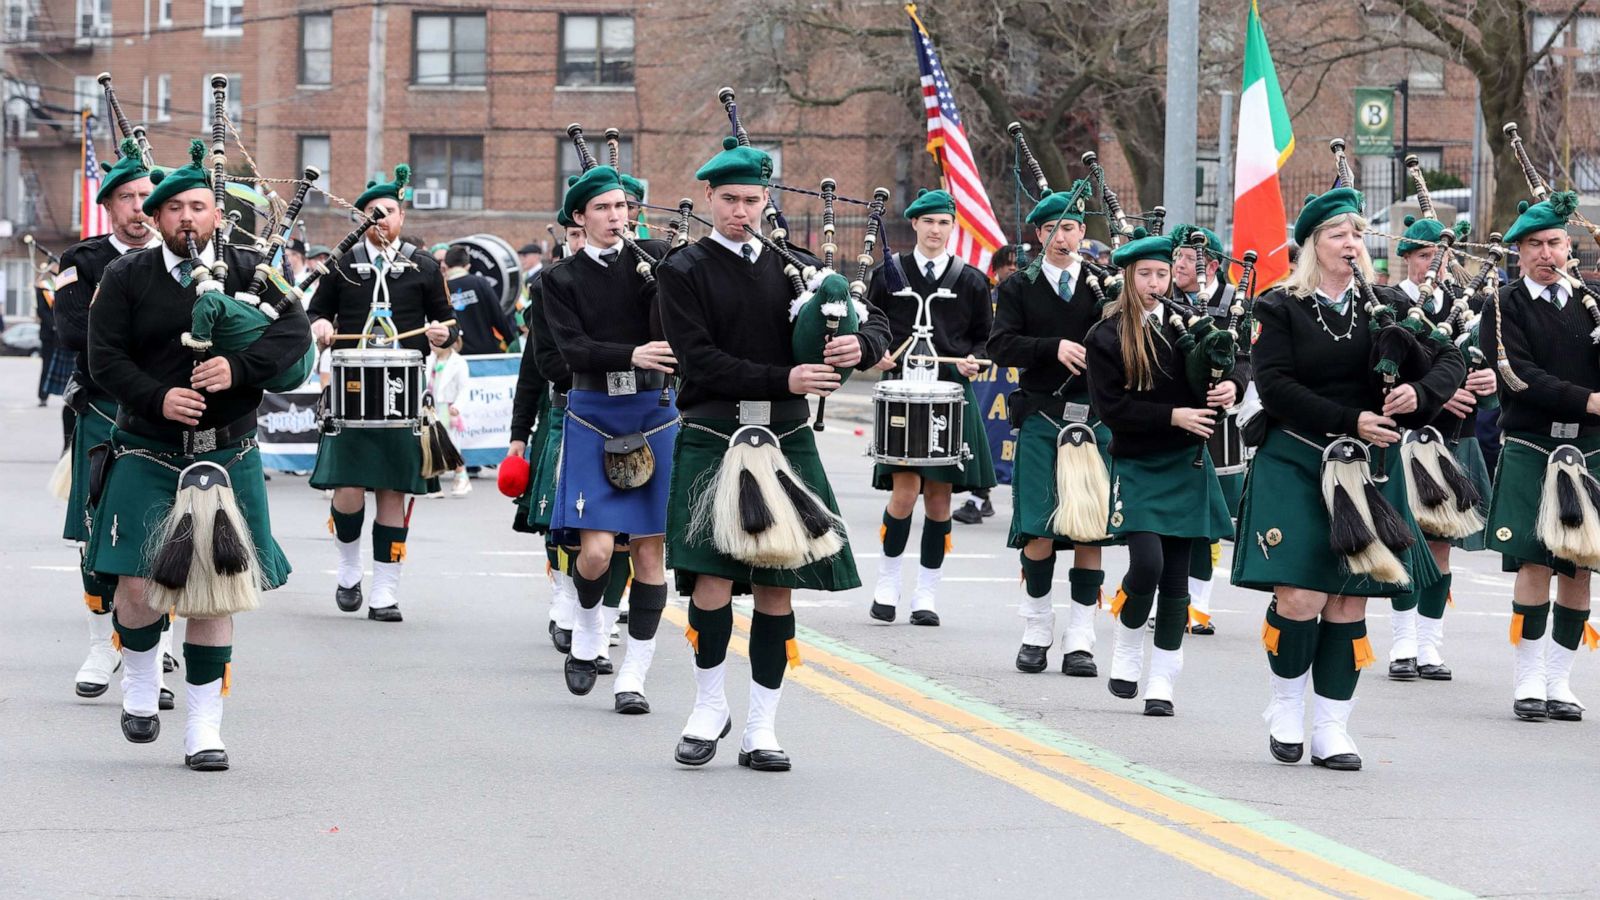 Man allegedly threatens to kill police officers at St. Patrick’s Day parade